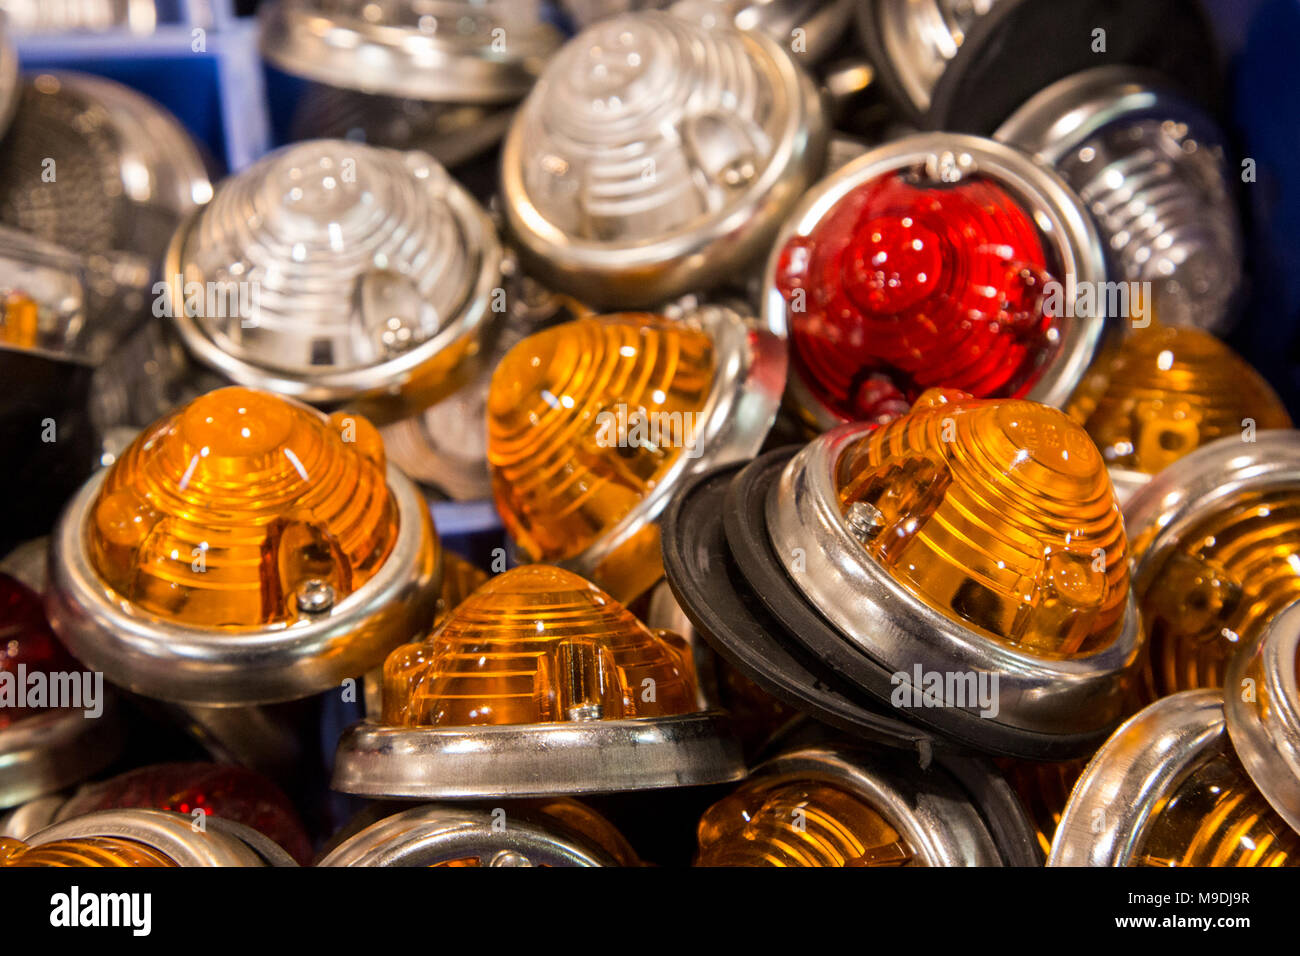 Spare parts, indicators and lights. Techno-Classica Essen is the world leading automobile show for classic and vintage cars and collectible automobiles. In 2018, the motor show attracted over 185,000 visitors. More than 1,250 exhibitors from over 30 countries take part. Stock Photo